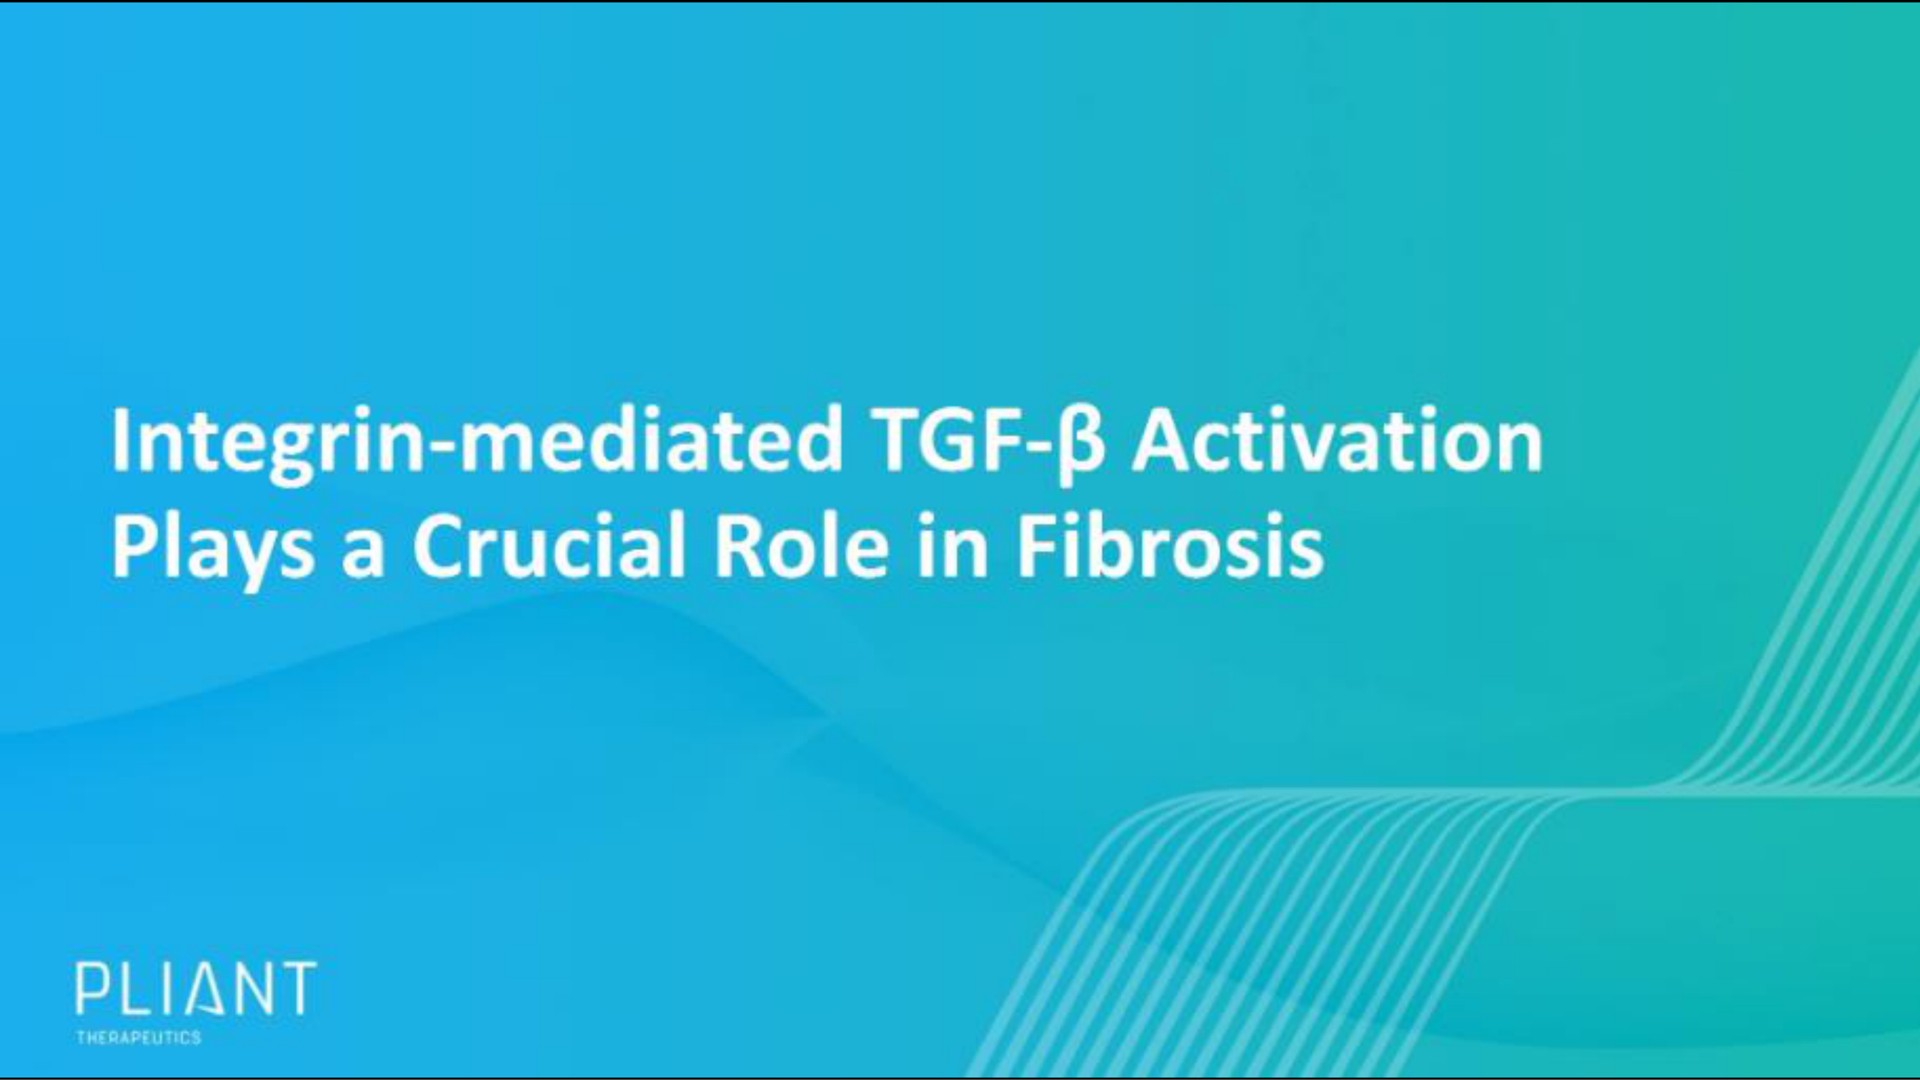 mediated activation plays a crucial role in fibrosis | Pilant Therapeutics